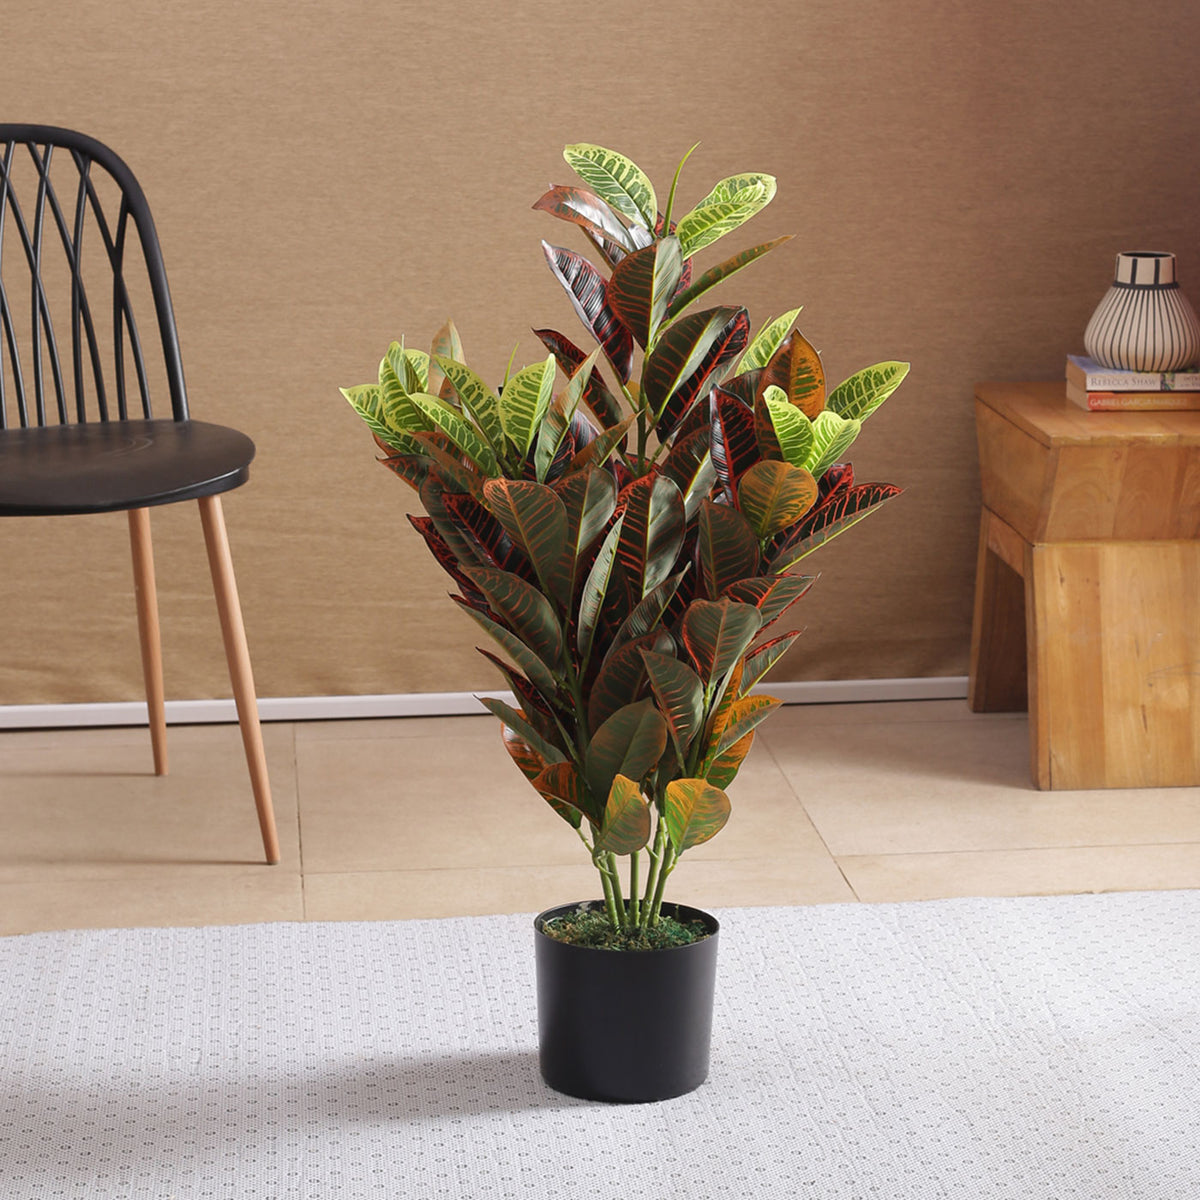 Artificial Real Touch Croton Plant | Ornamental Plant for Interior Decor/Home Decor/Office Decor | with Basic Black Pot | 85 cm Short Indoor Tropical Plant | Durable